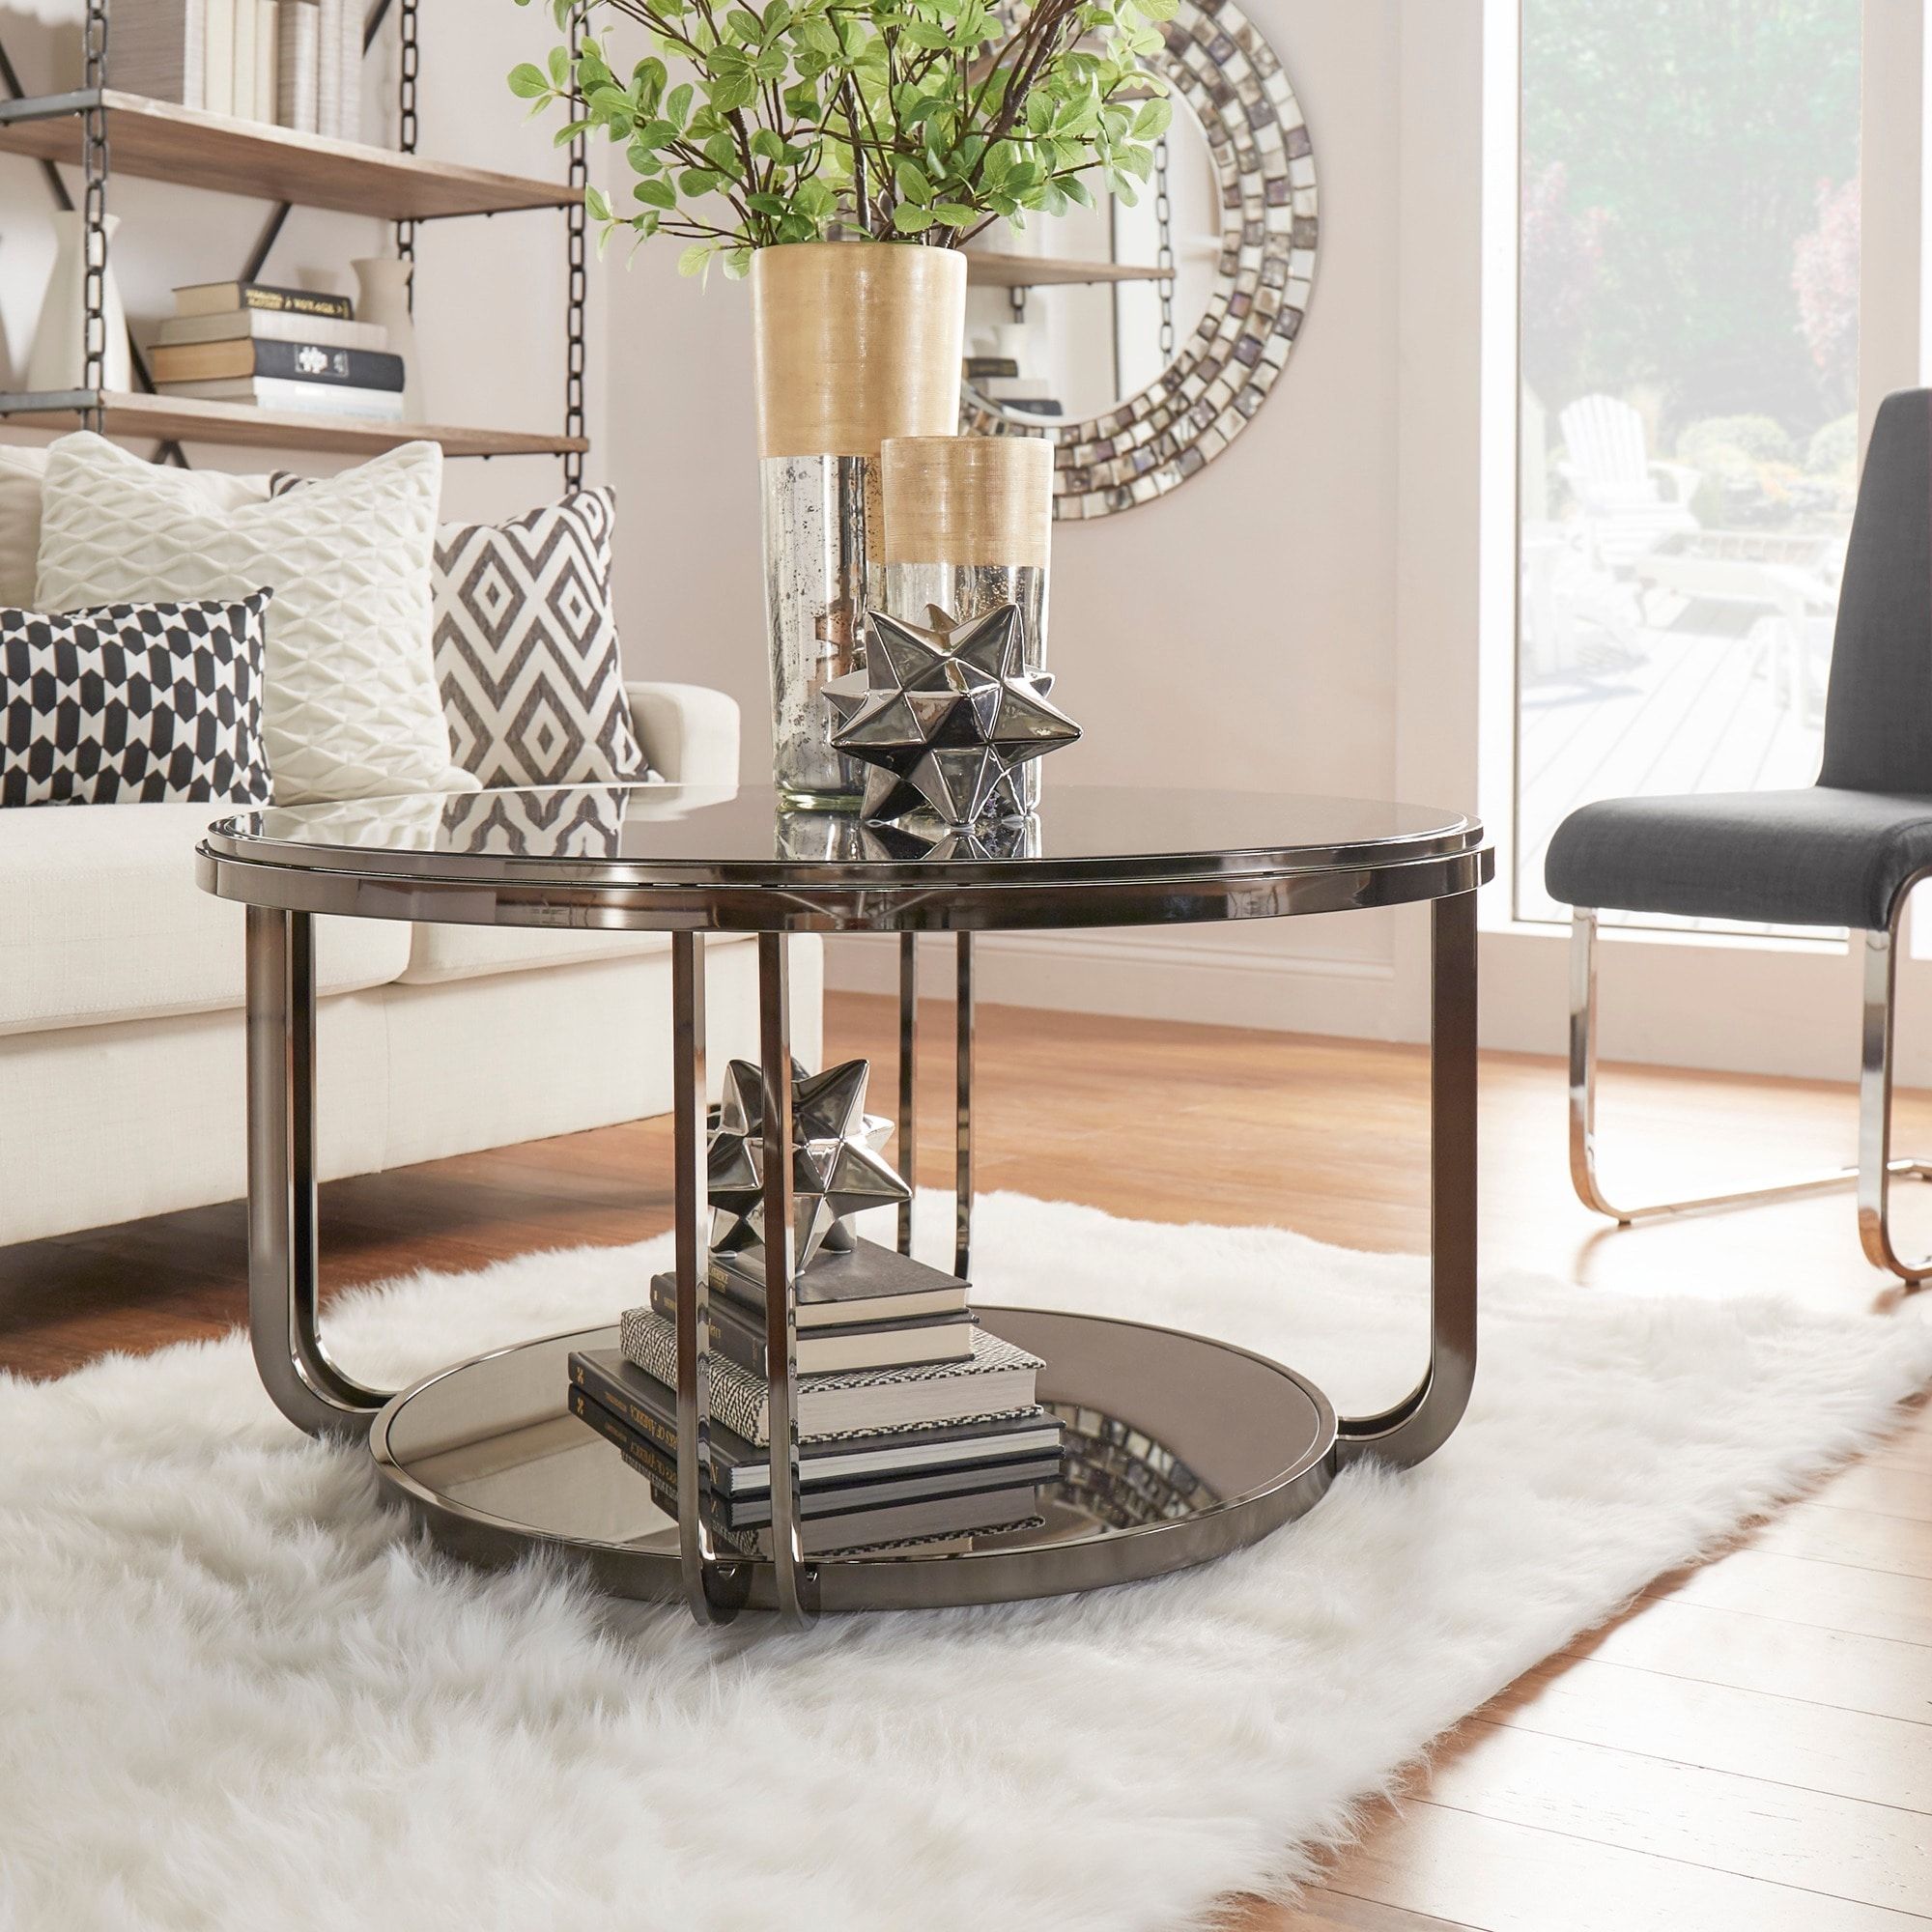 Shop Edison Black Nickel Plated Castered Modern Round Coffee Table Regarding Full Black Round Coffee Tables (View 13 of 20)